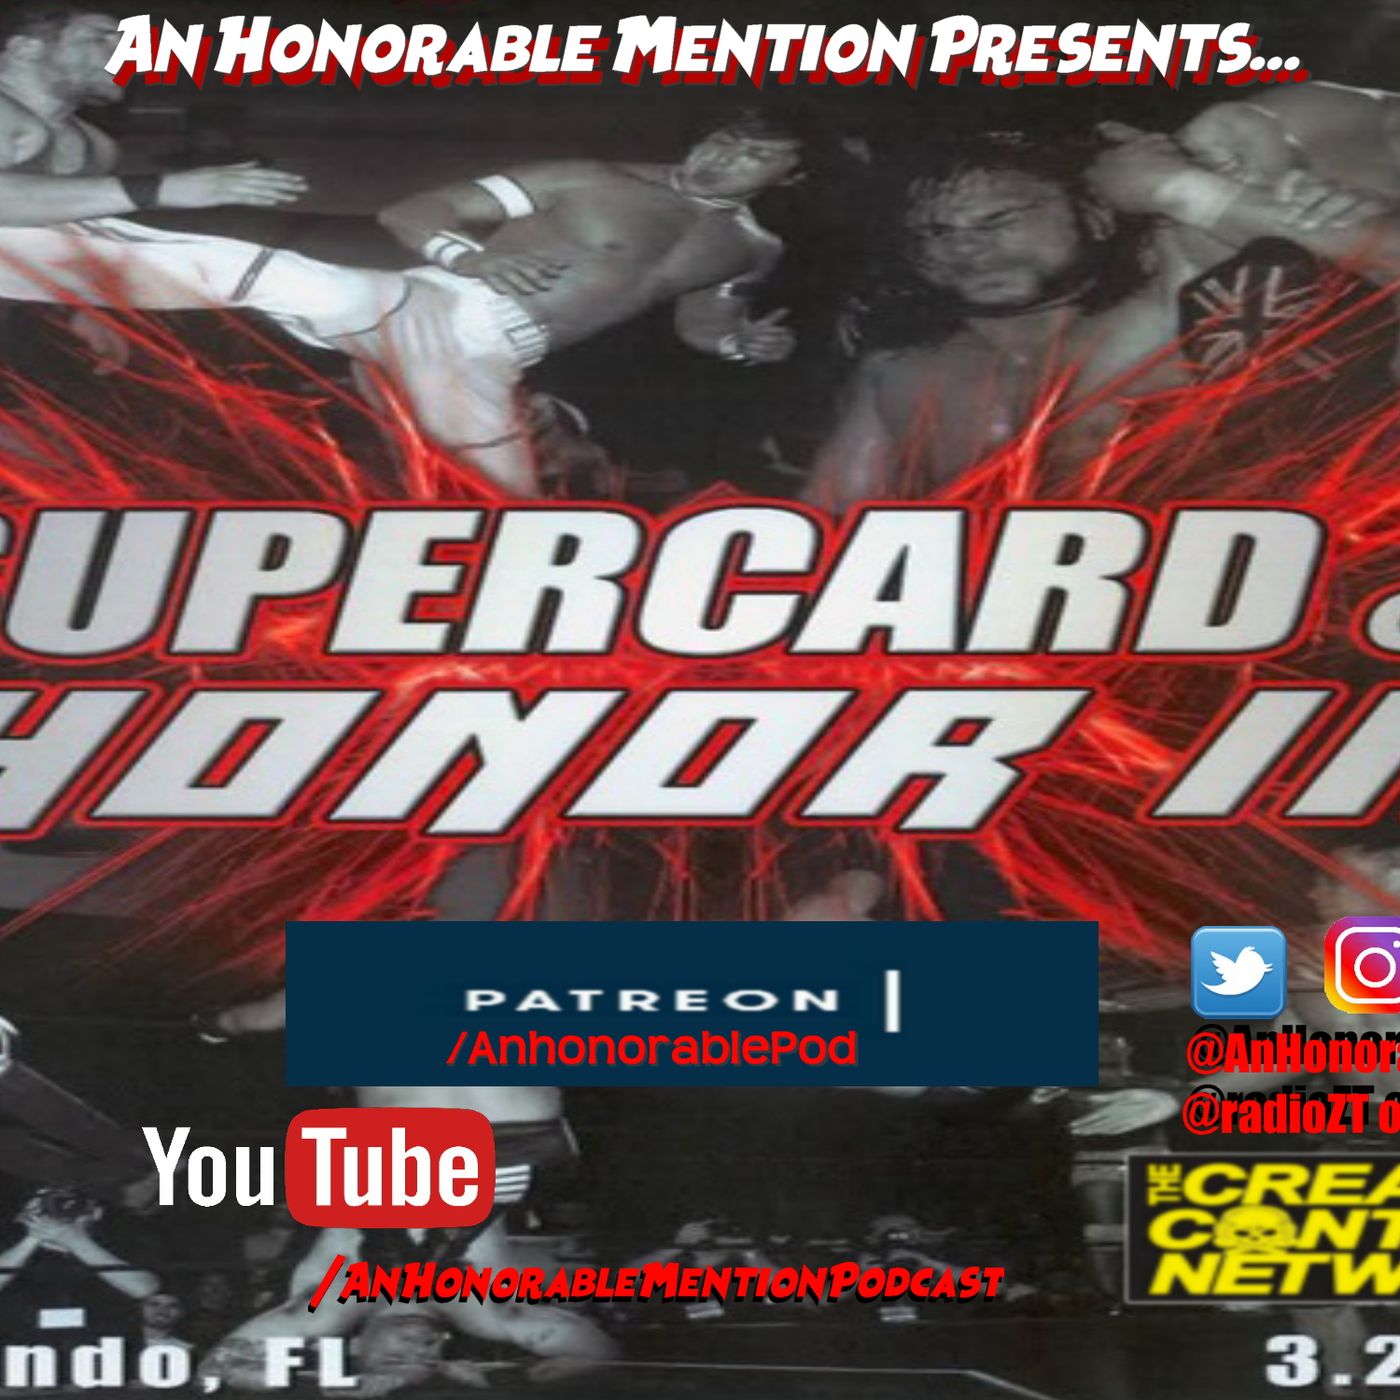 Episode 198: Supercard of Honor III (Presented by Patreon.com/AnHonorablePod)